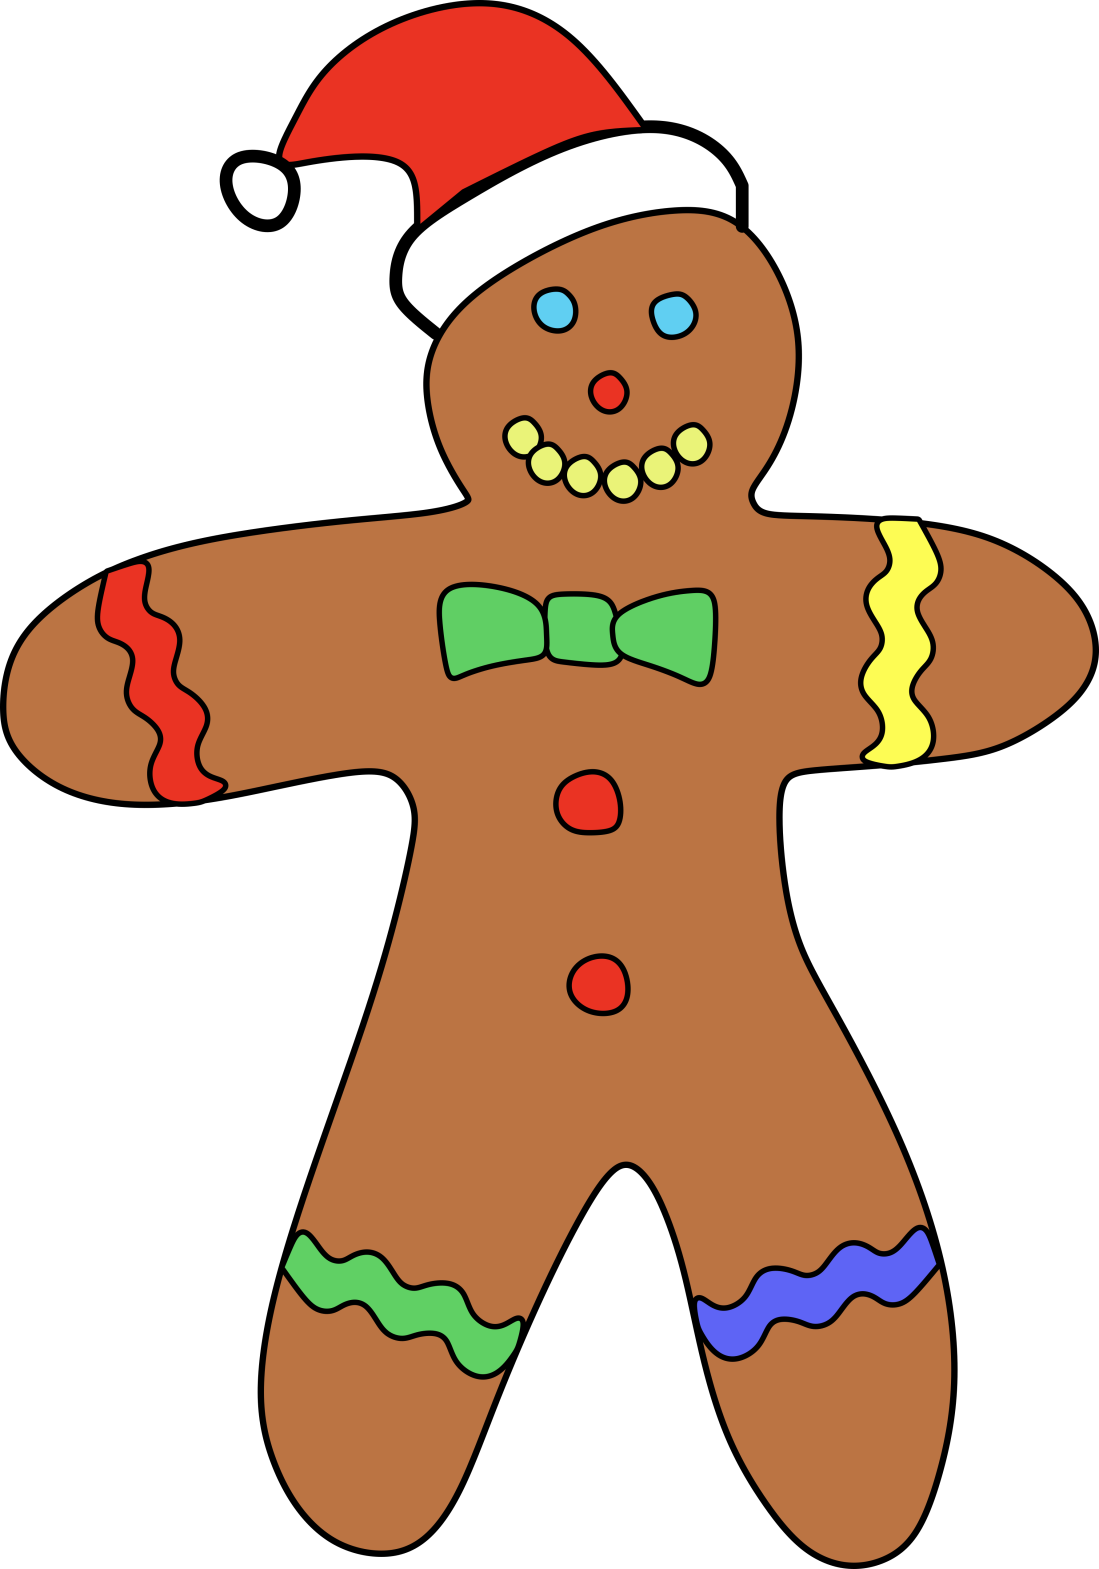 Advent â day gingerbread man â computing and food cookies spam and a puzzle â